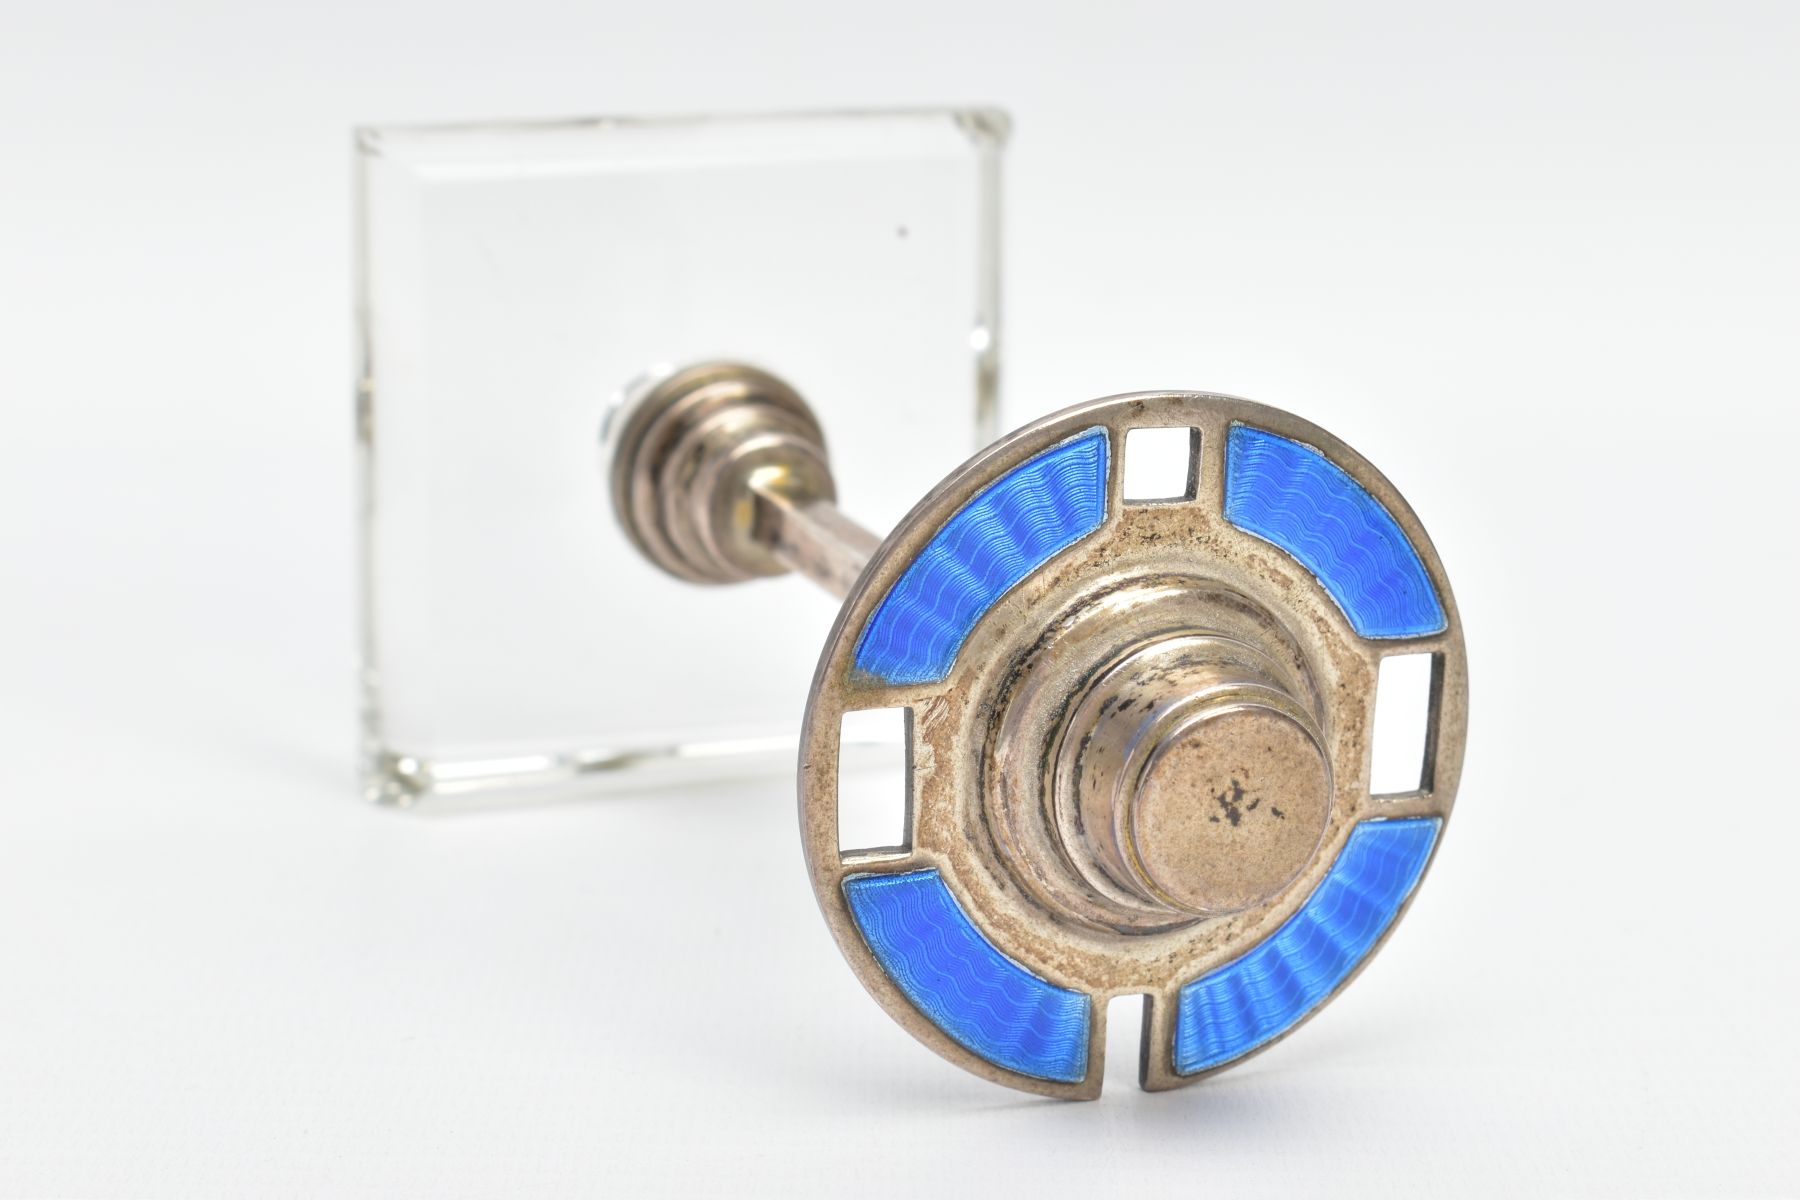 A 1930S SILVER ENAMEL MANICURE STAND, a circular silver stand with blue guilloche enamel detail - Image 3 of 9